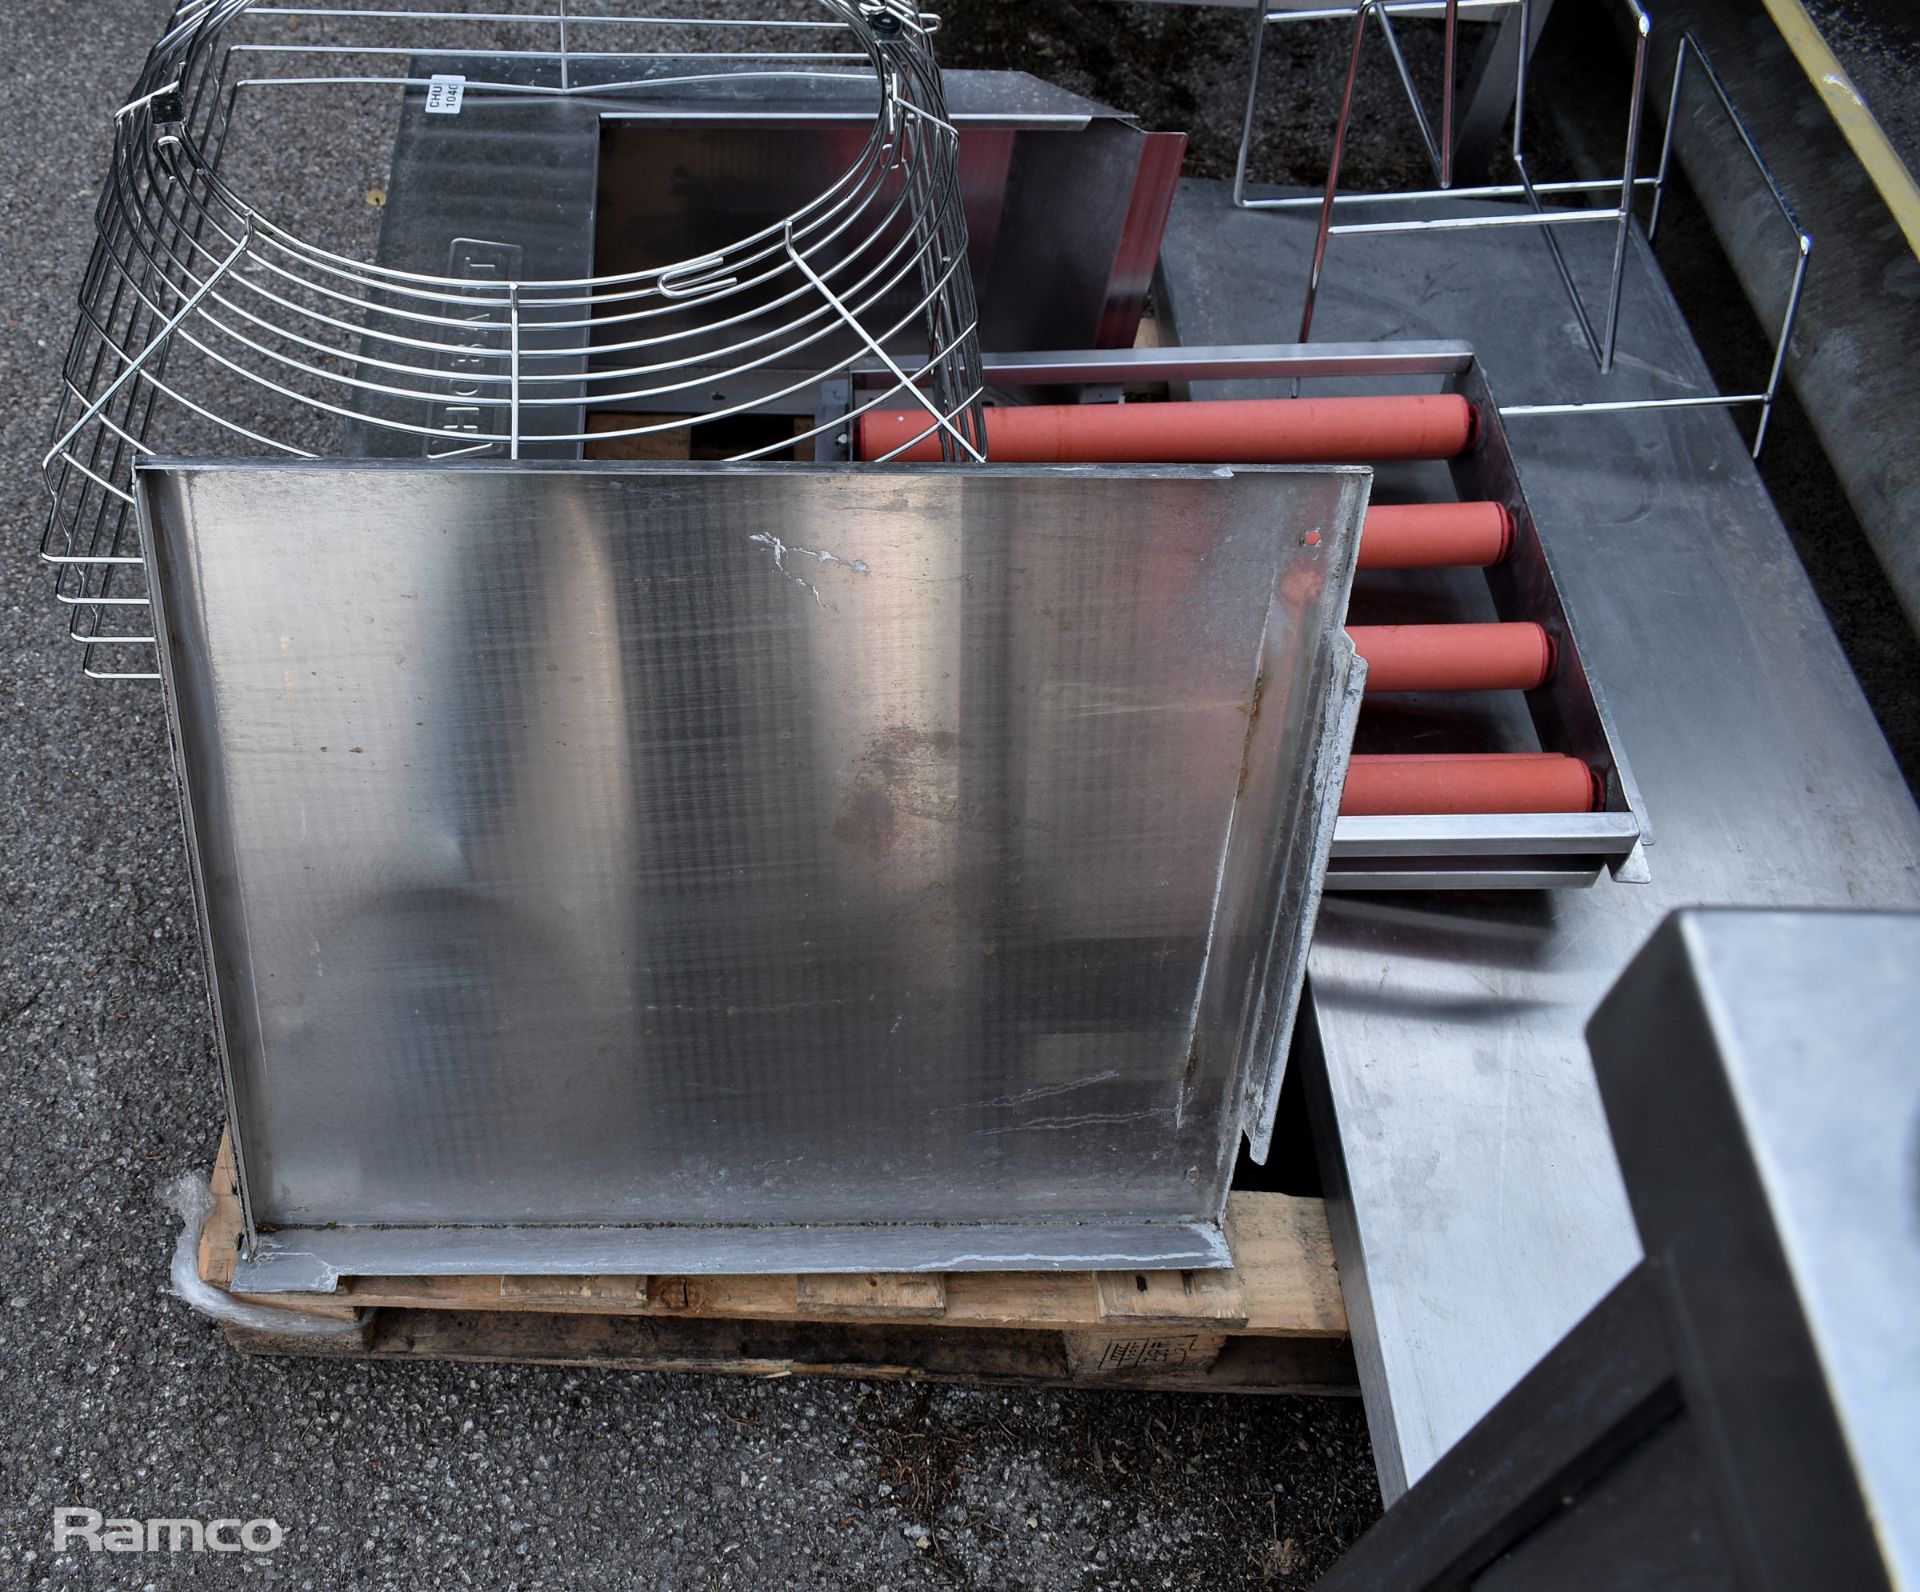 Catering spares - stainless steel panels, rollers, fan grill and Hobart surround panel - Image 2 of 6